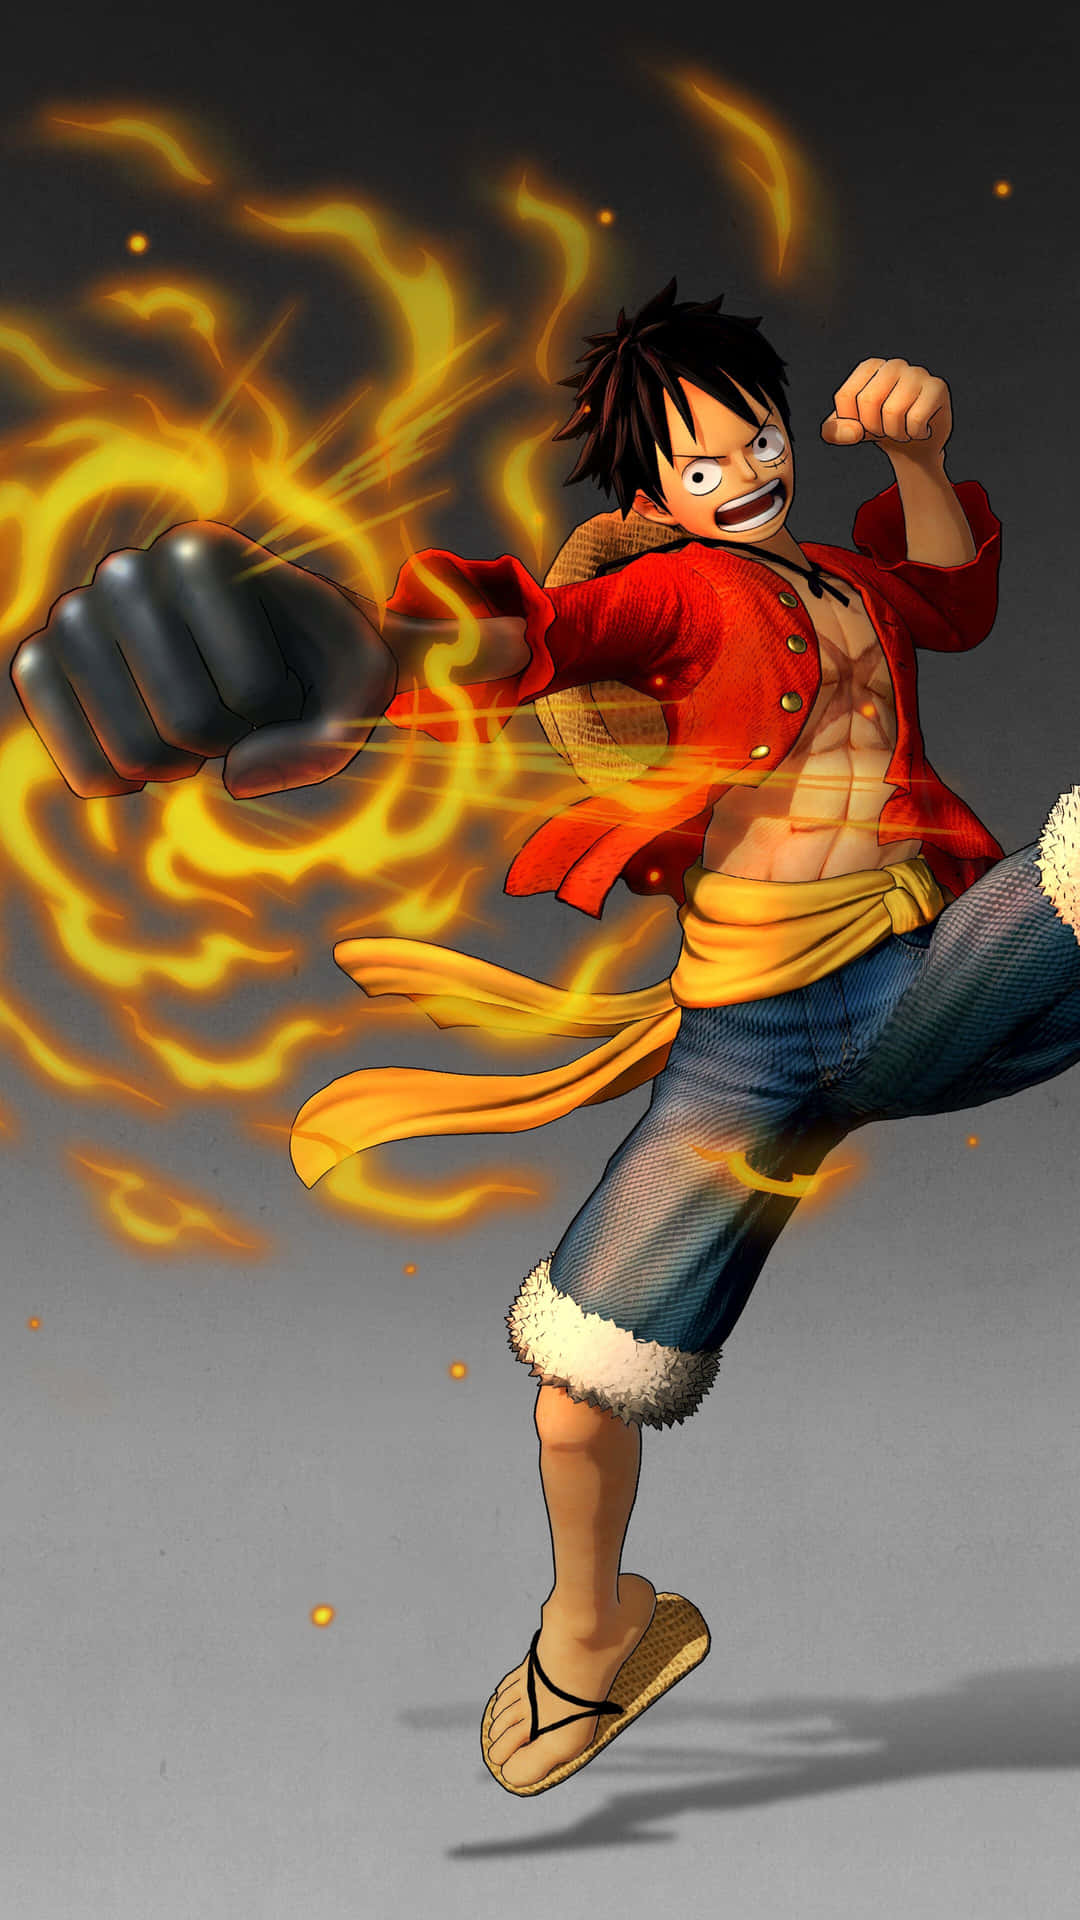 Epic One Piece Adventure: Luffy On His Way To Conquer The Great Line - Wallpaper